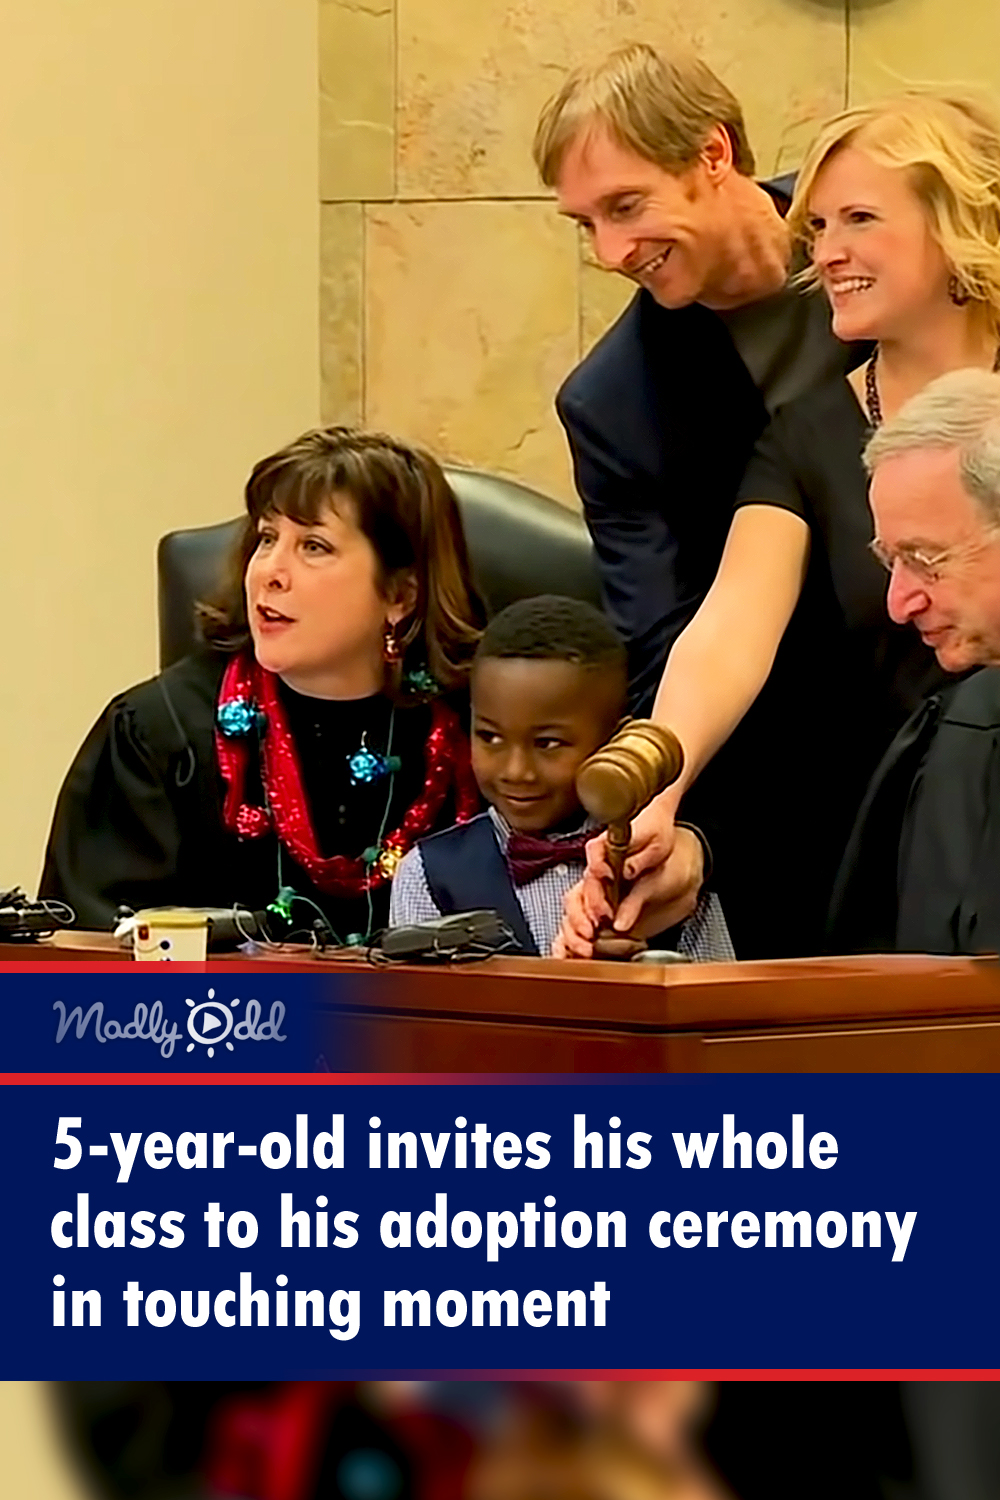 5-year-old invites his whole class to his adoption ceremony in touching moment